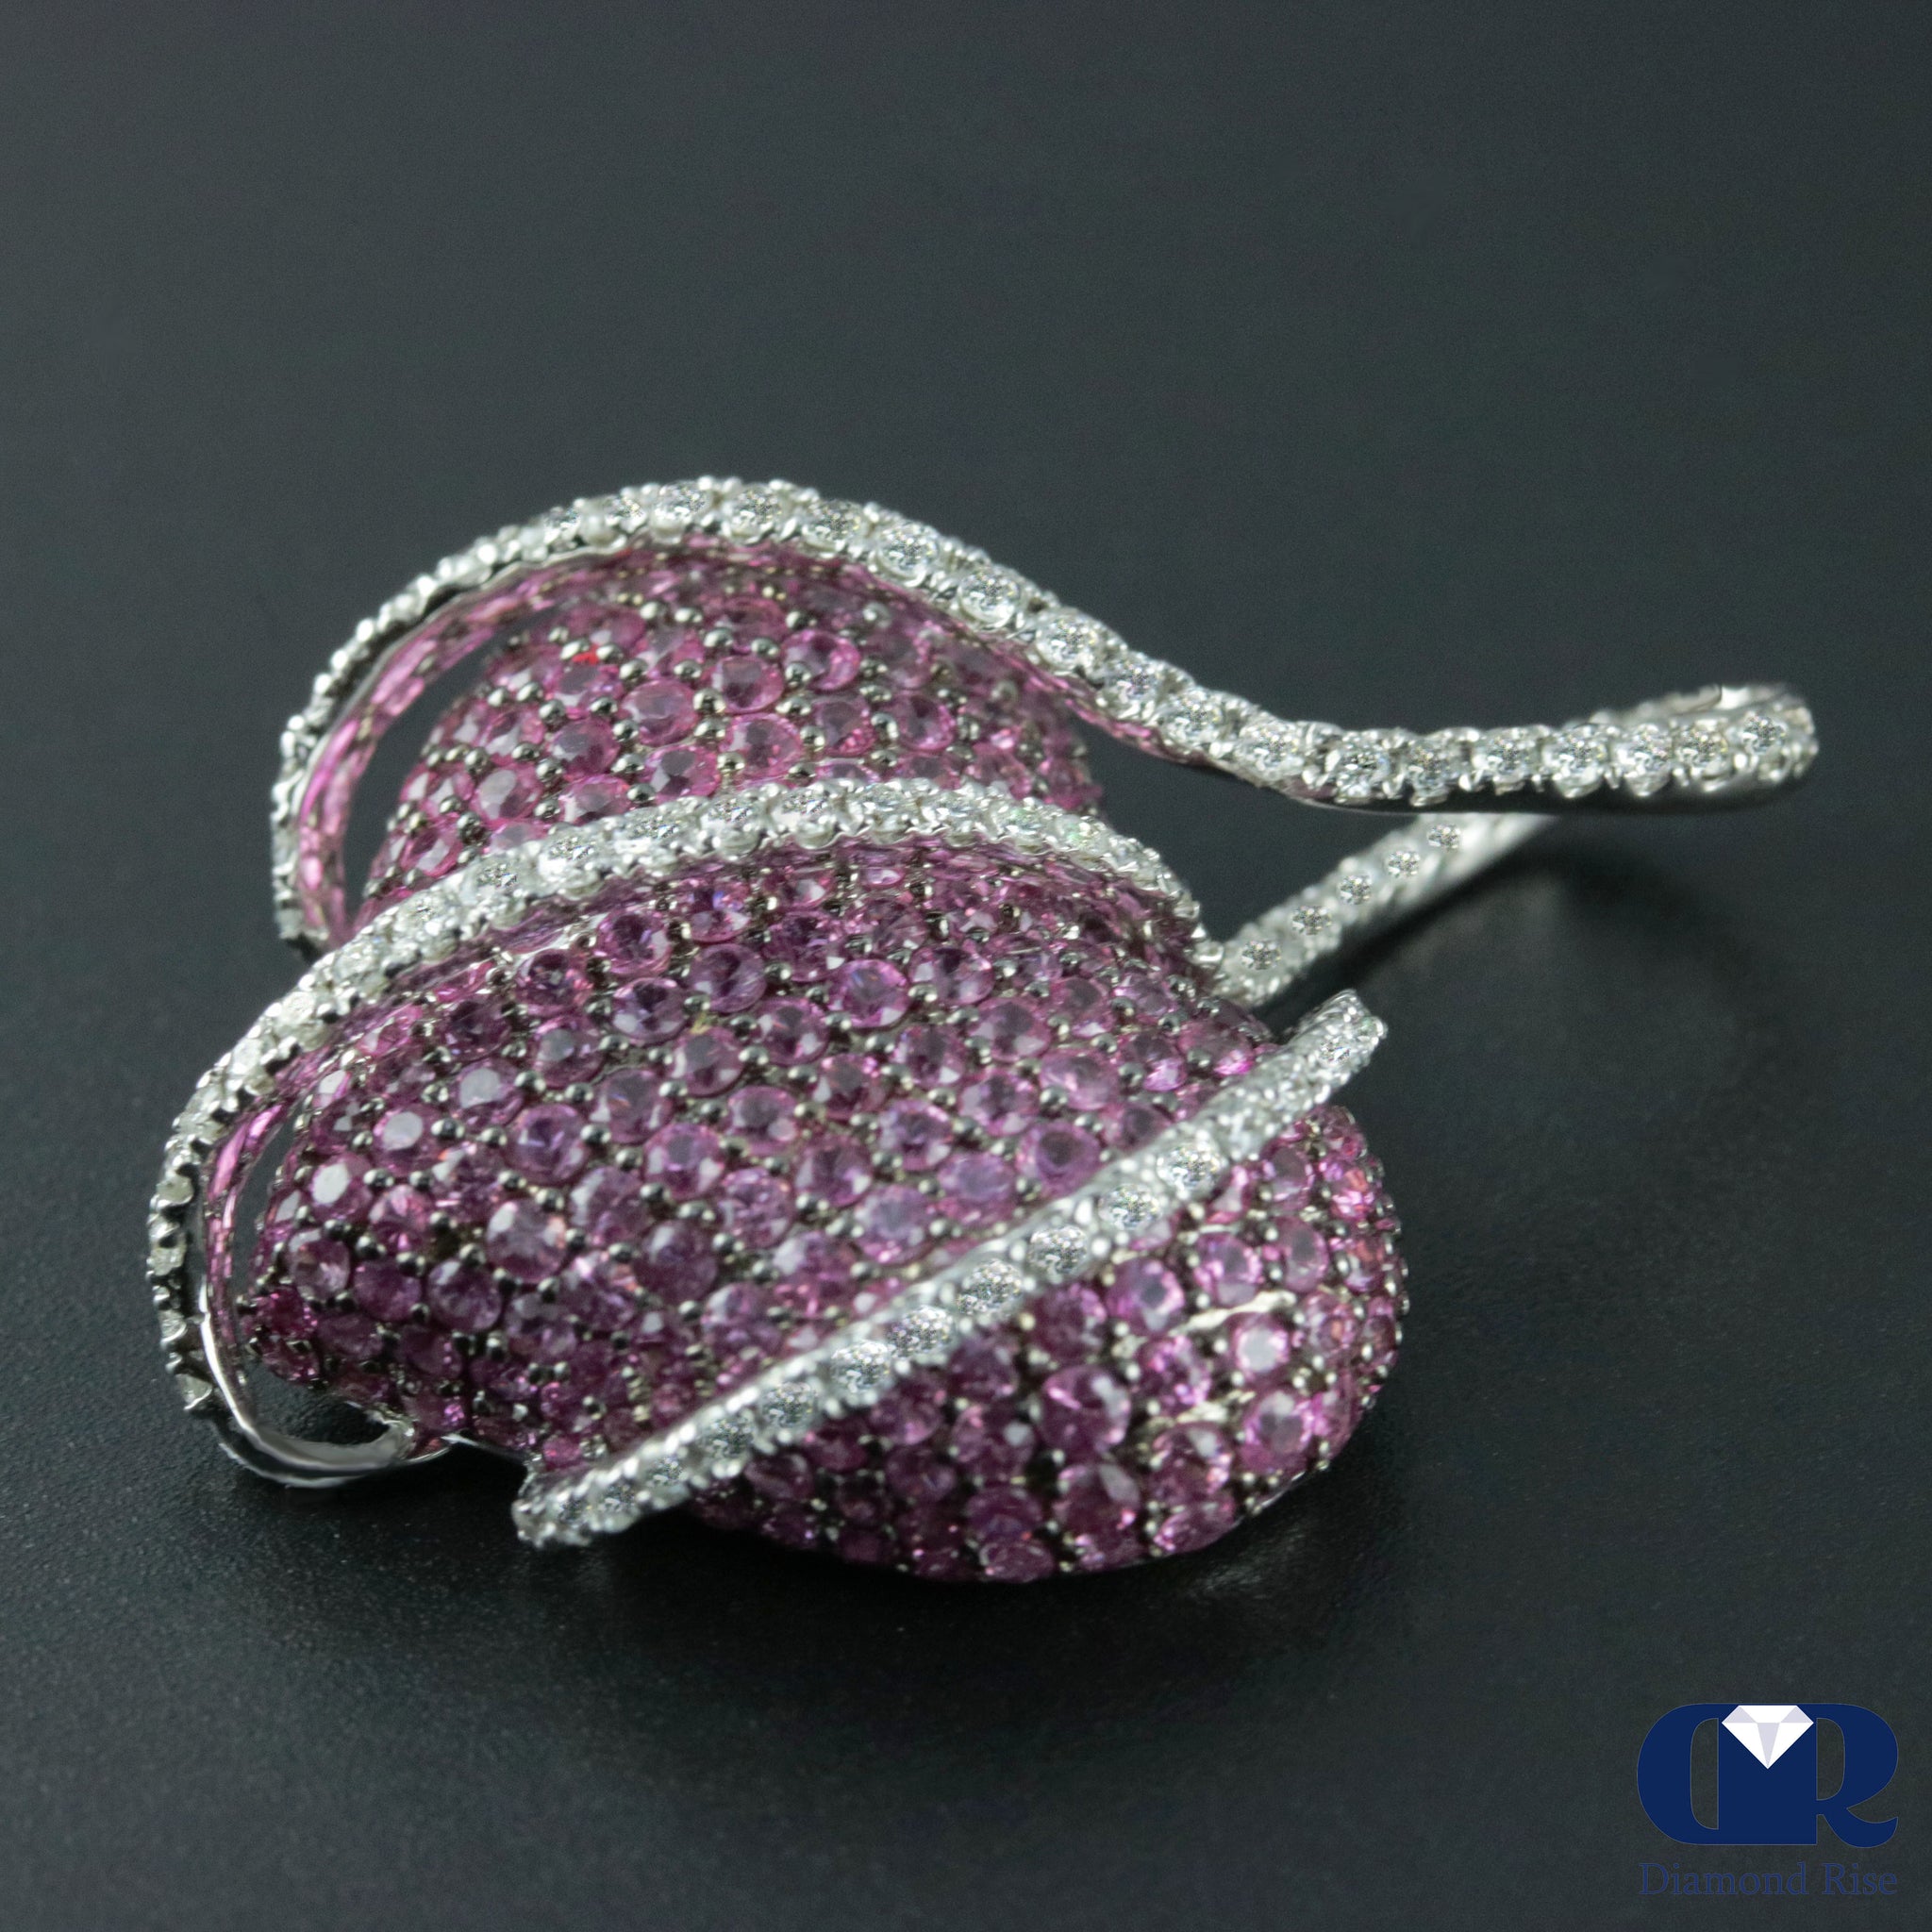 Heart Shape Pink Sapphire and Diamond Necklace